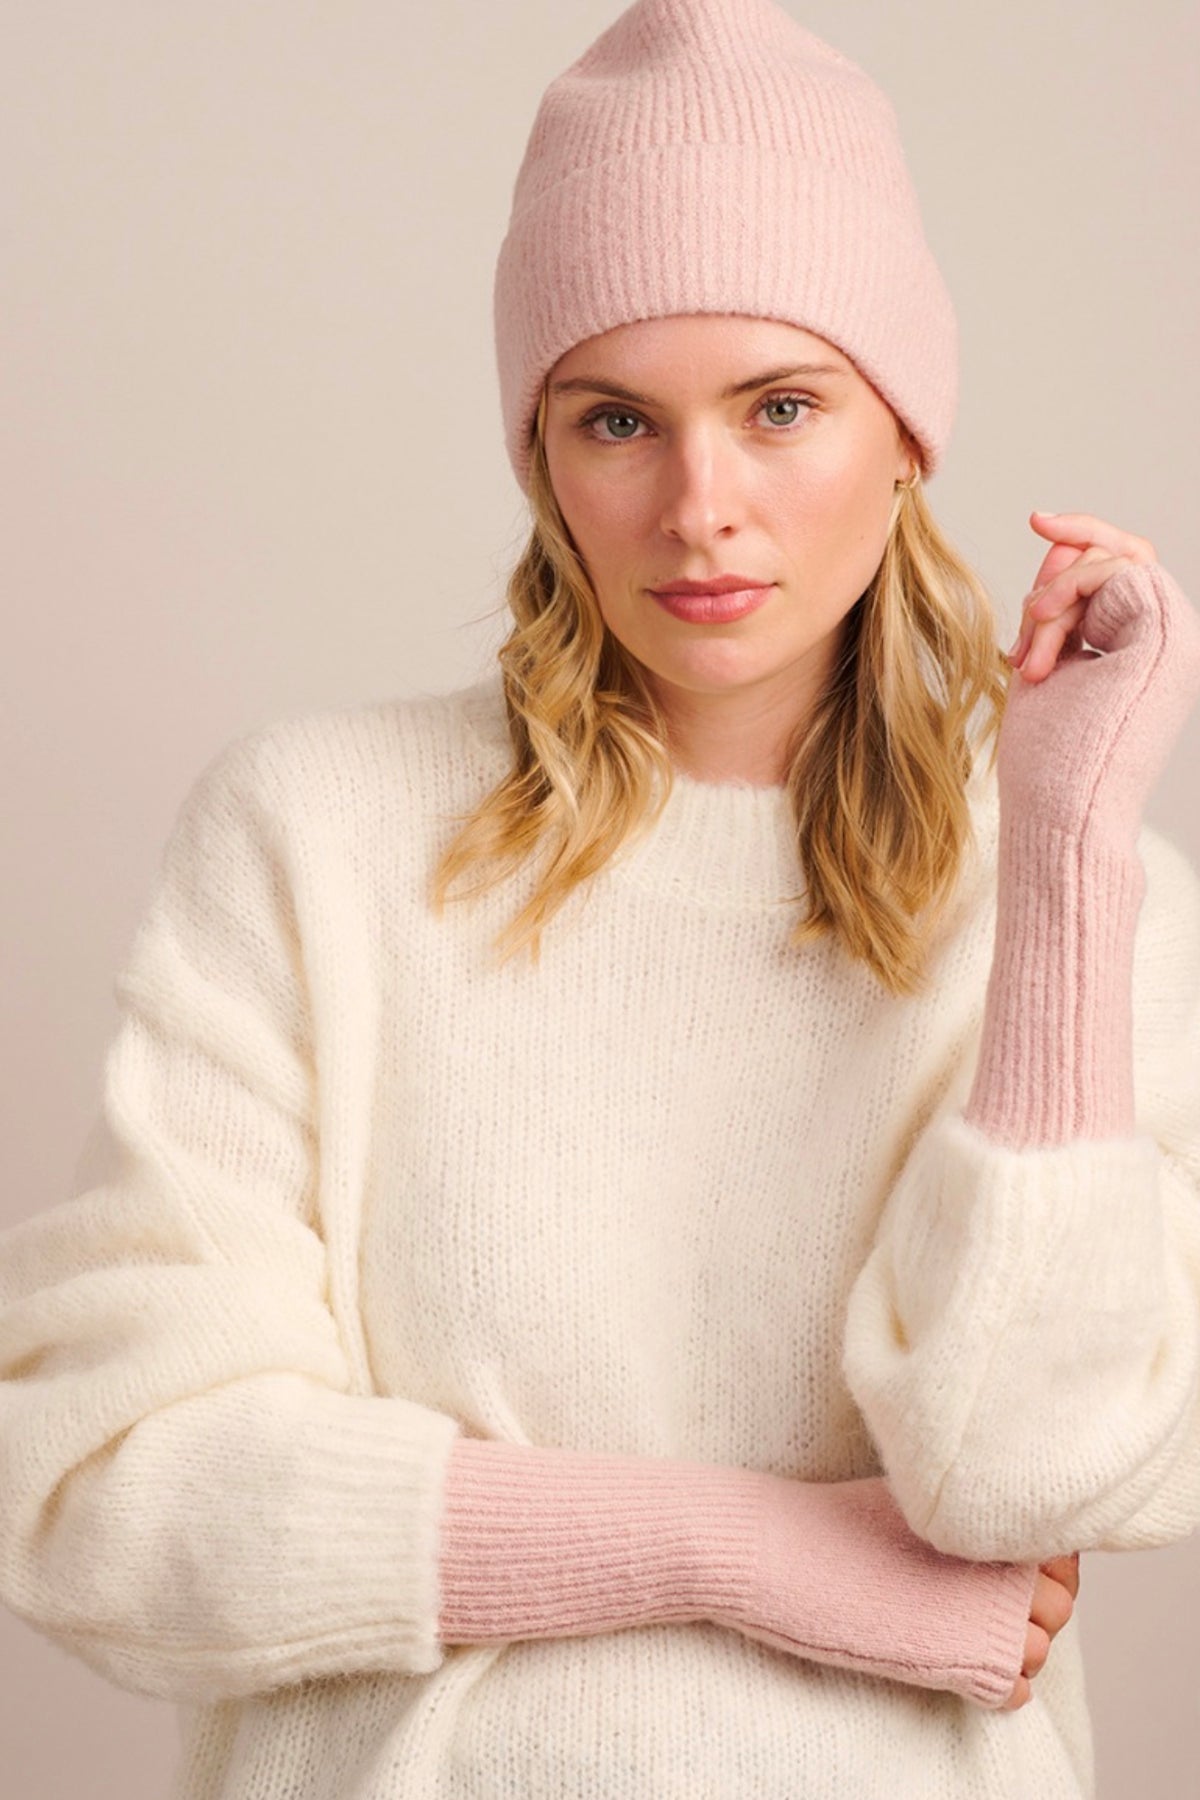 Blush Recycled Knit Beanie